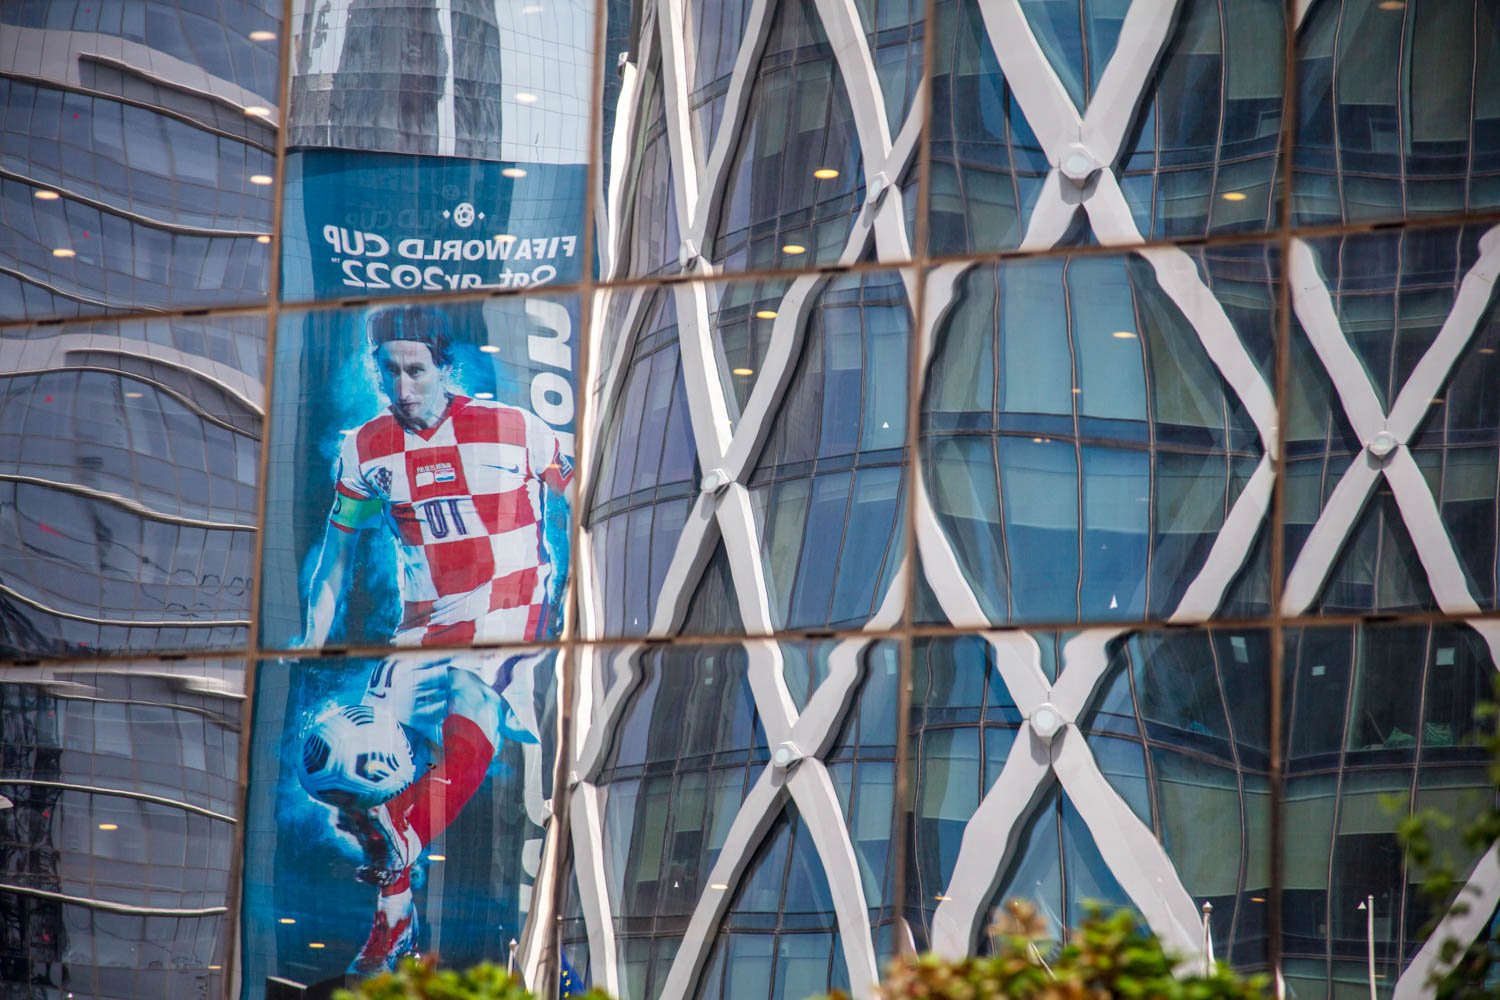  Views of a modern skyscraper and a World Cup billboard in Doha, Qatar on August 16, 2022. 